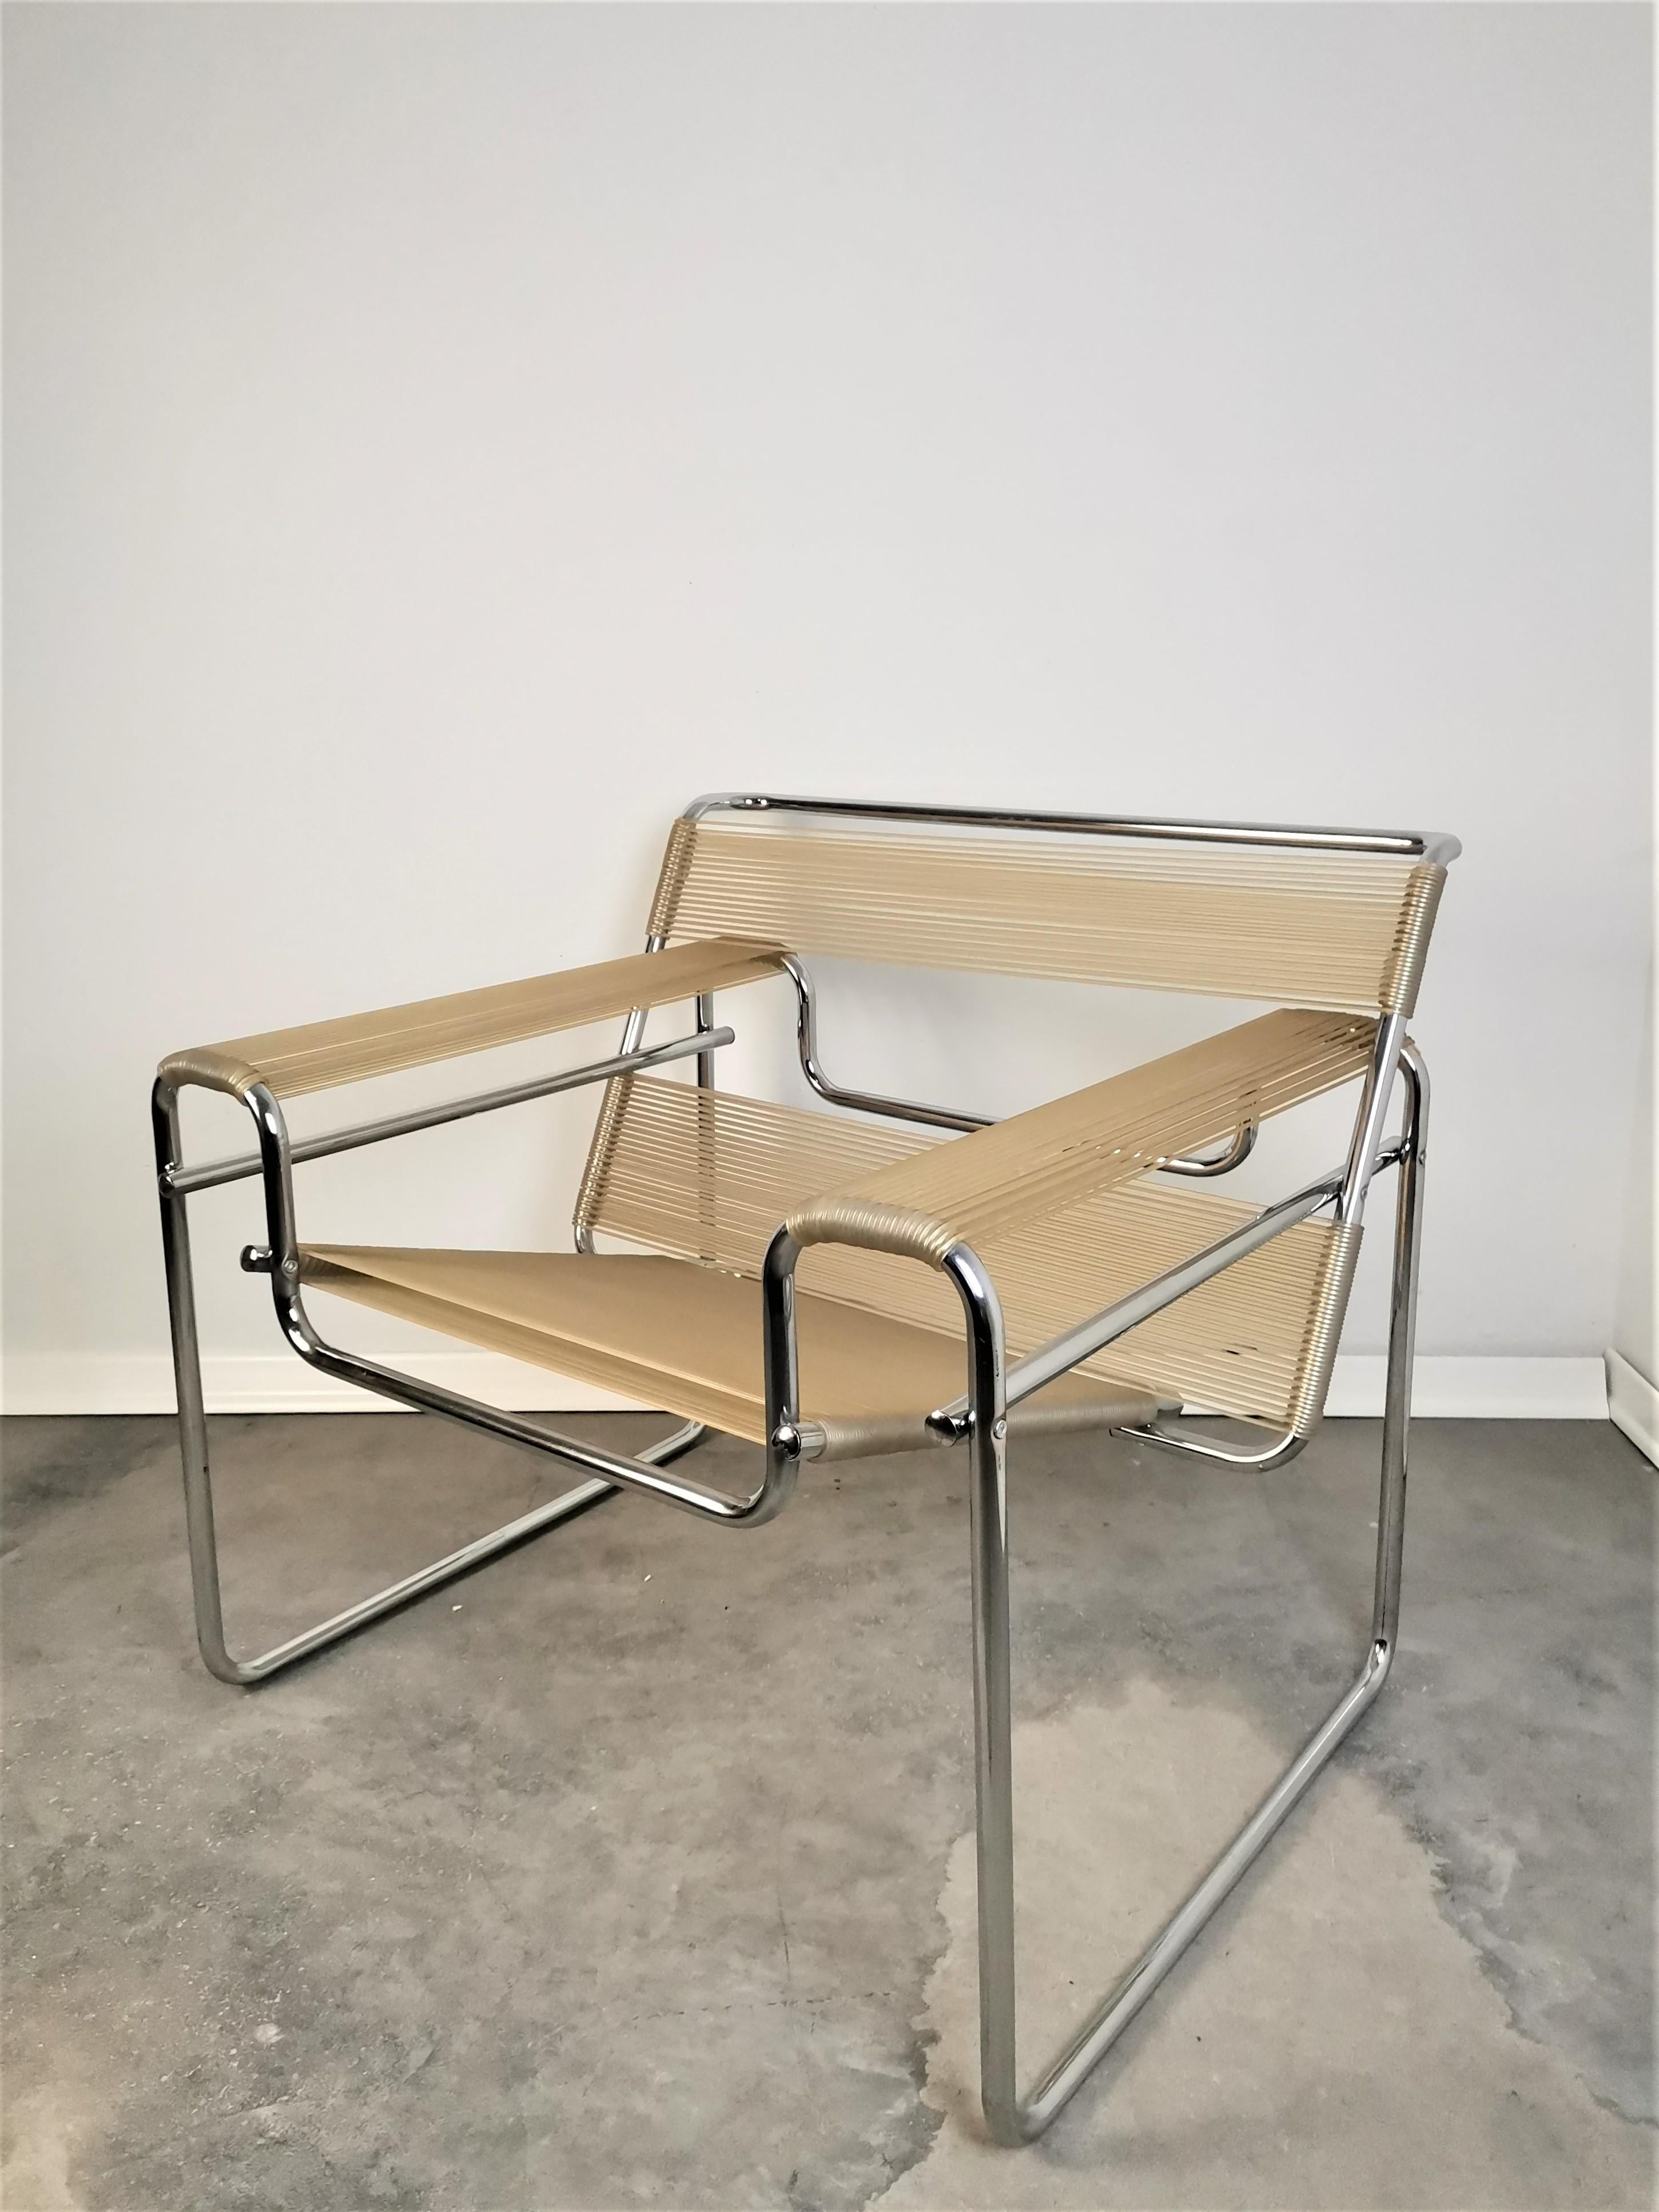 Wassily Chair style
Period of production: 1990s
Designer: Marcel Breuer
Manufacturer: Italy, 1990s
Style: midcentury modern, classic design
Materials: metal frame, silicon cord, chrome.